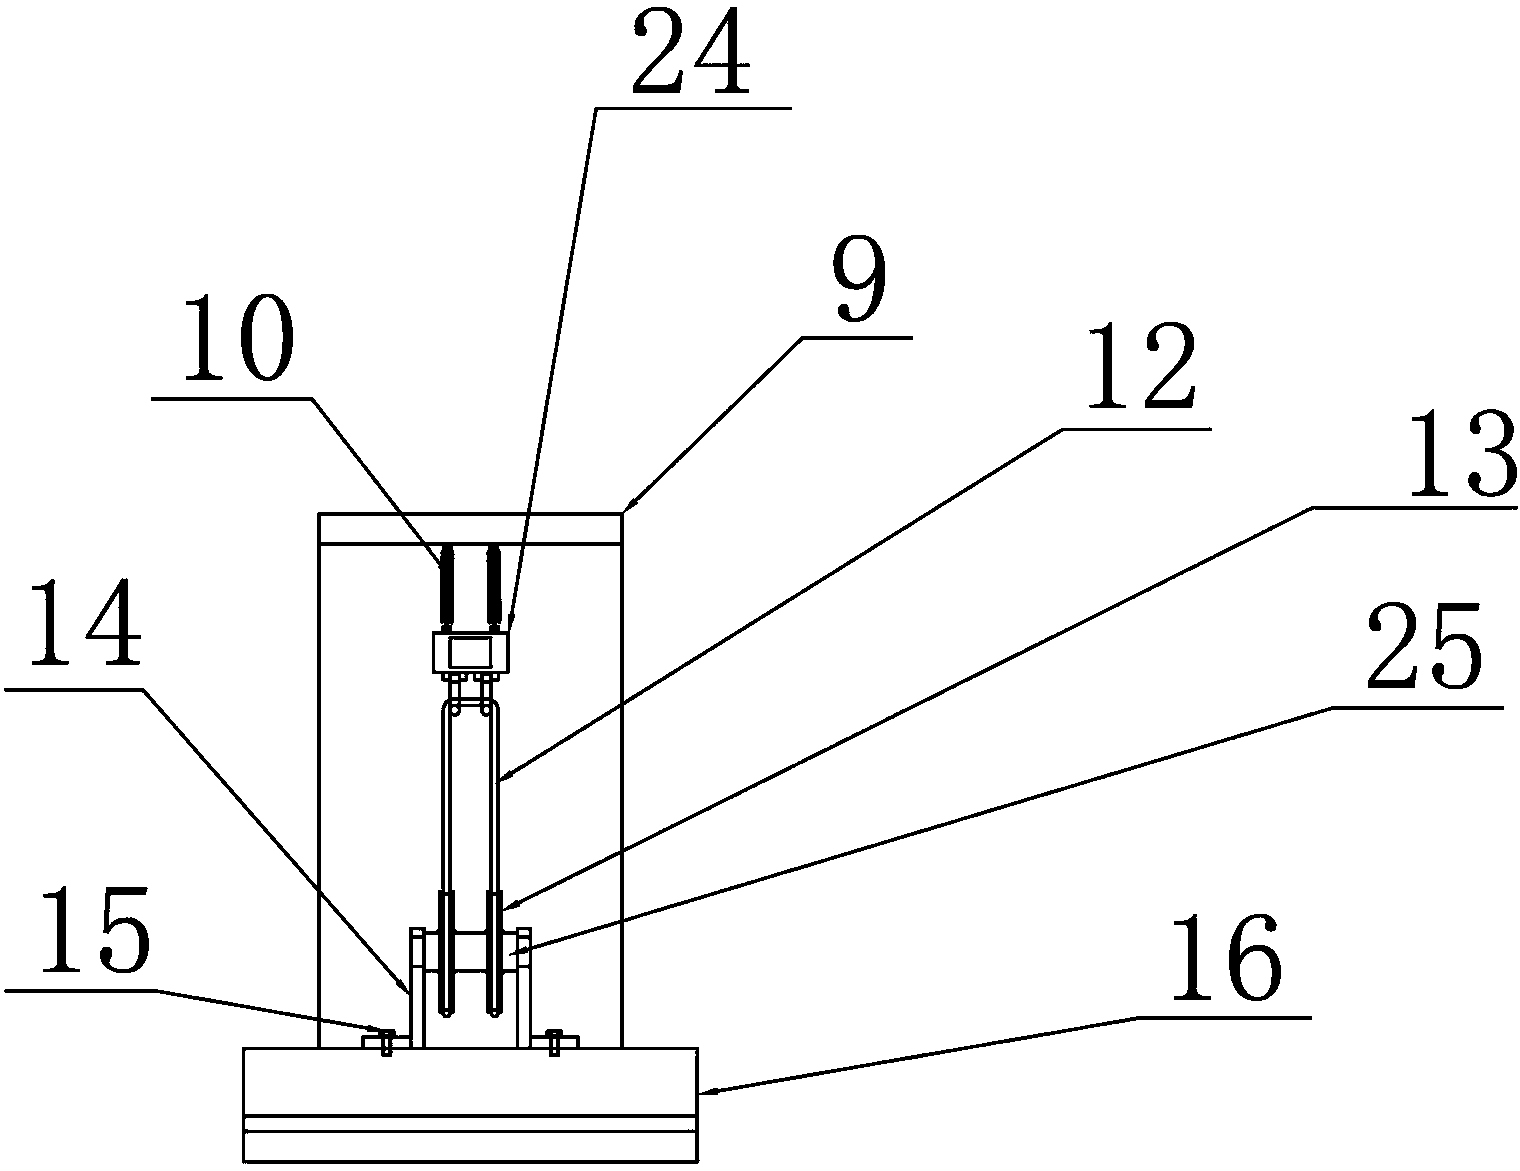 Safe monitoring device of winding engine